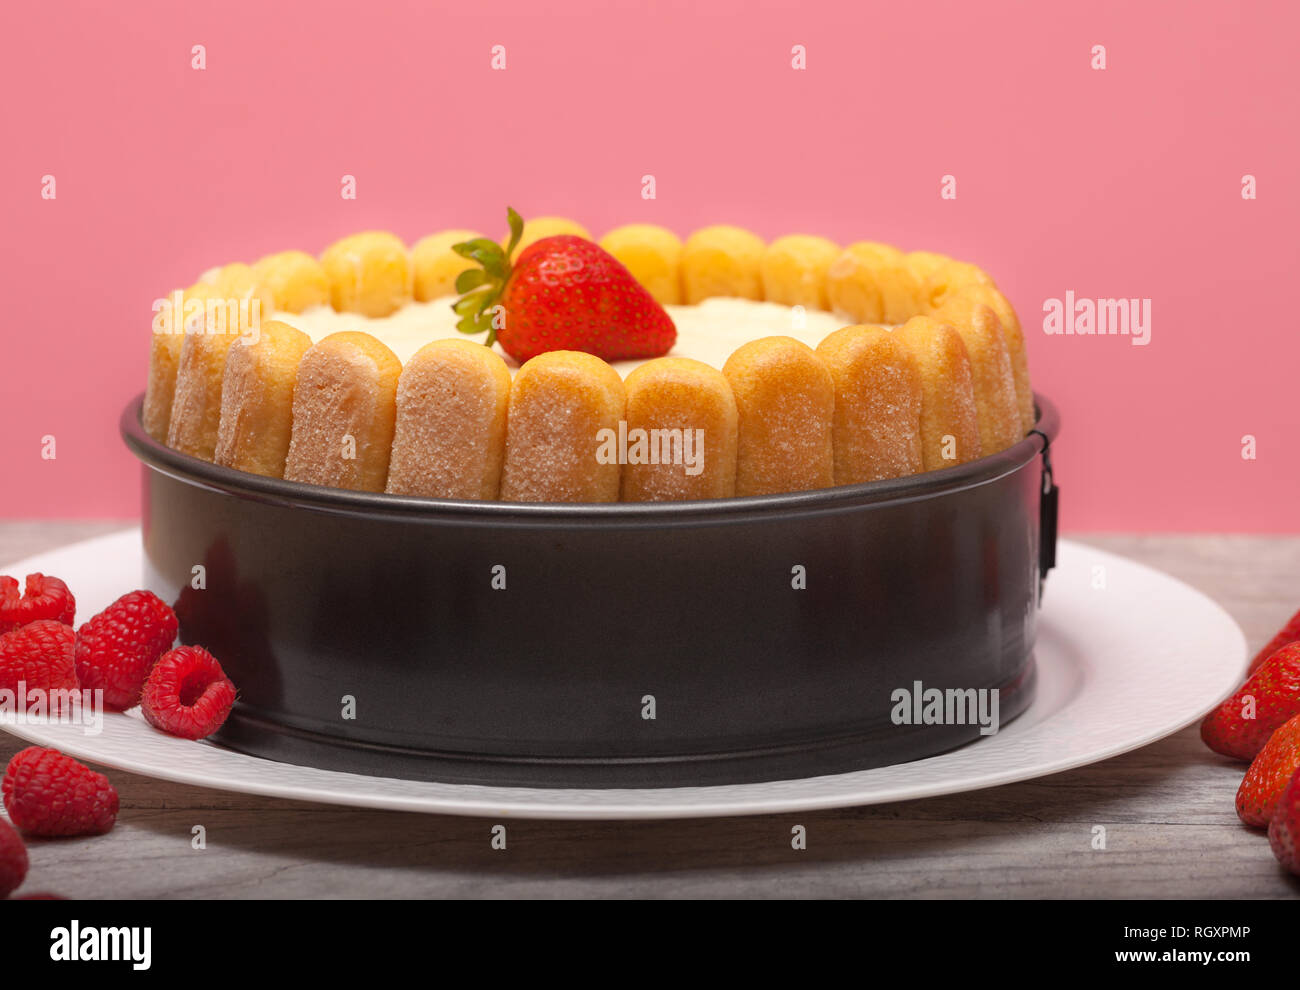 https://c8.alamy.com/comp/RGXPMP/diplomat-cake-or-charlotte-cake-with-strwaberries-and-lady-fingers-in-baking-pan-on-a-wooden-table-with-pink-background-RGXPMP.jpg